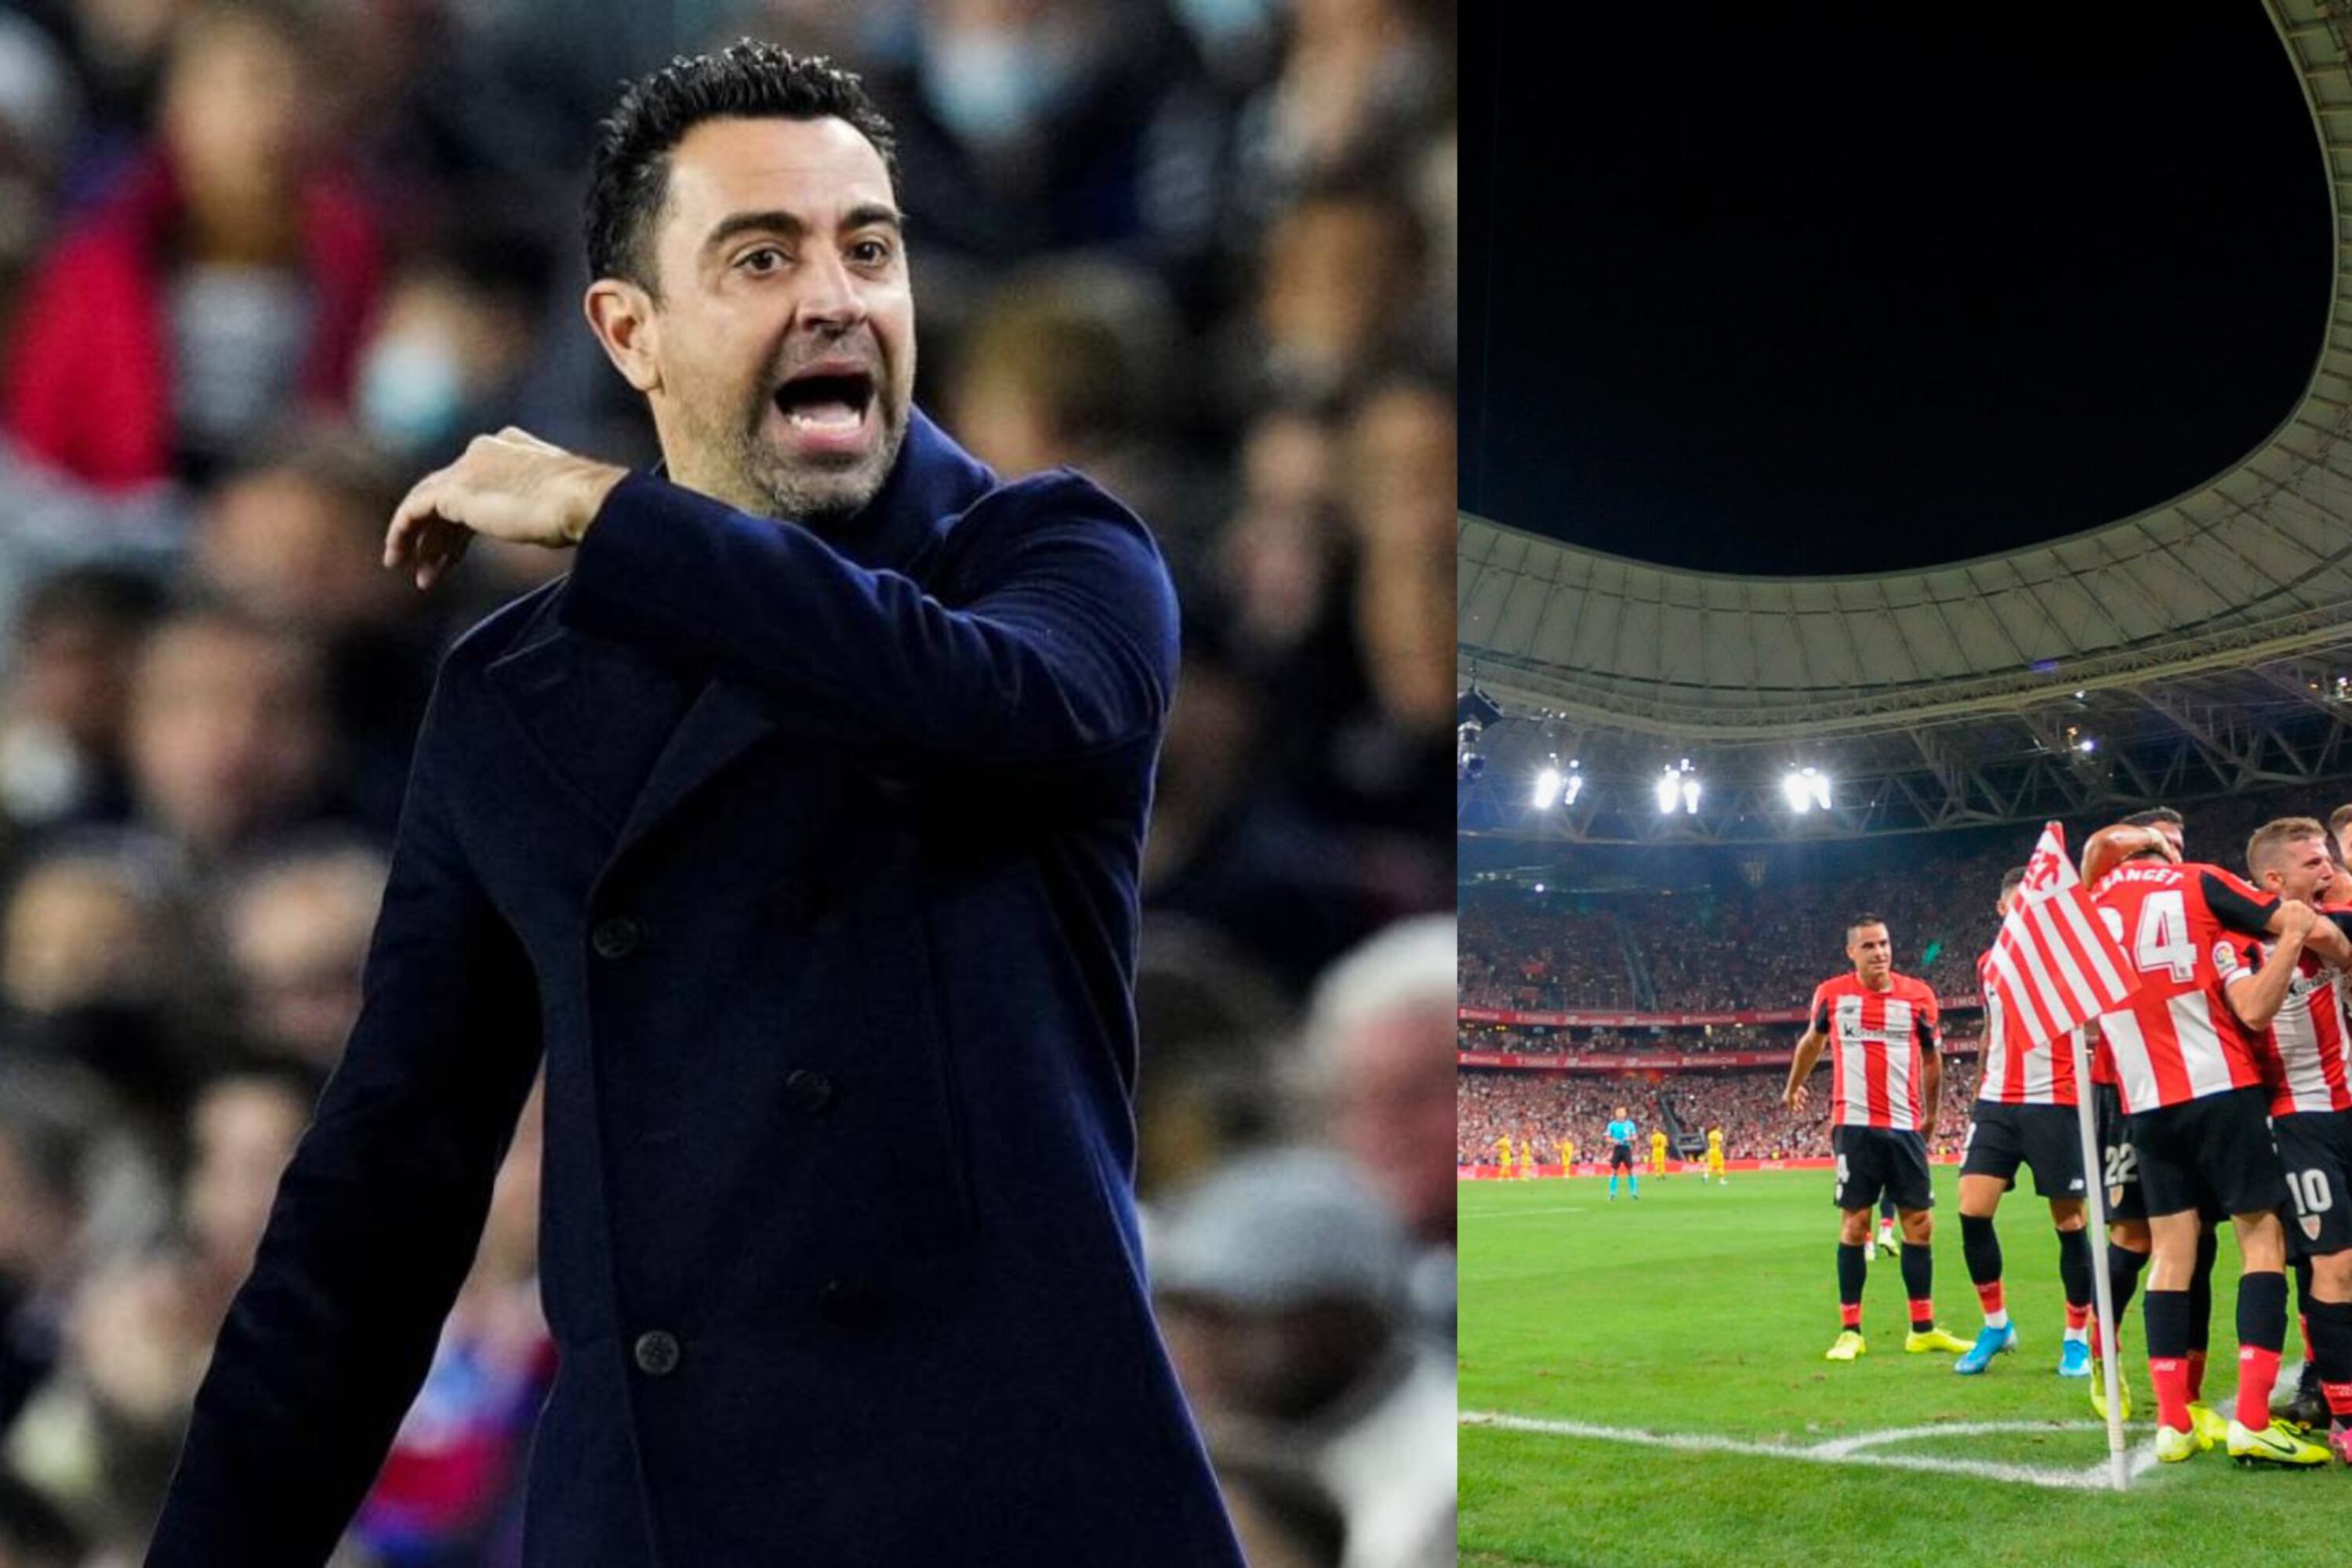 Xavi's reaction when he saw that Athletic Club scored a goal after 42 seconds